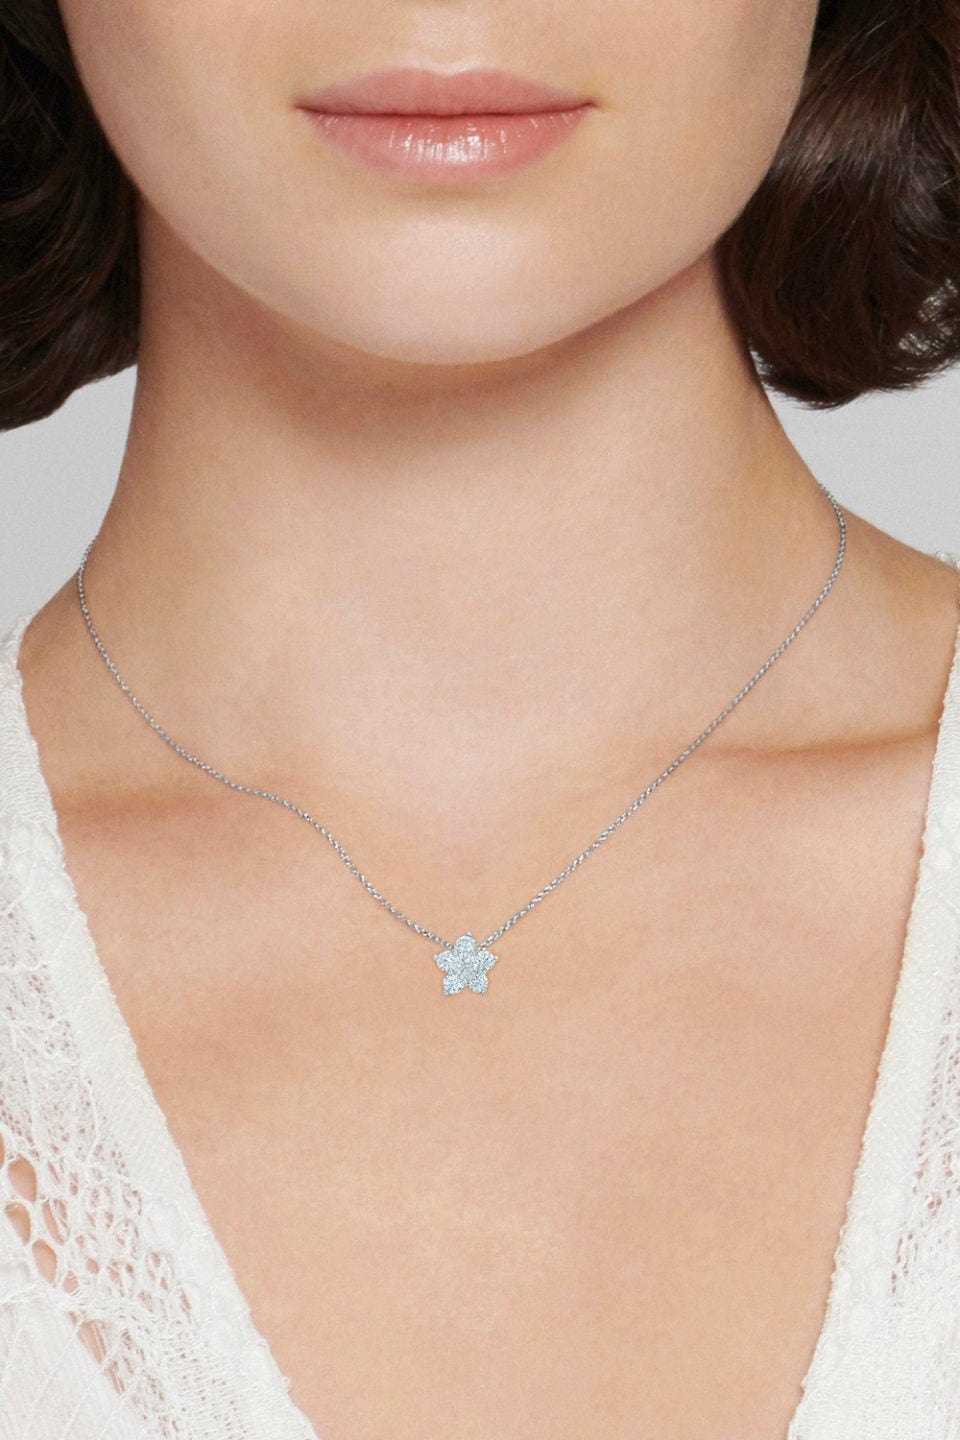 KWIAT-Floral Cluster Necklace-WHITE GOLD